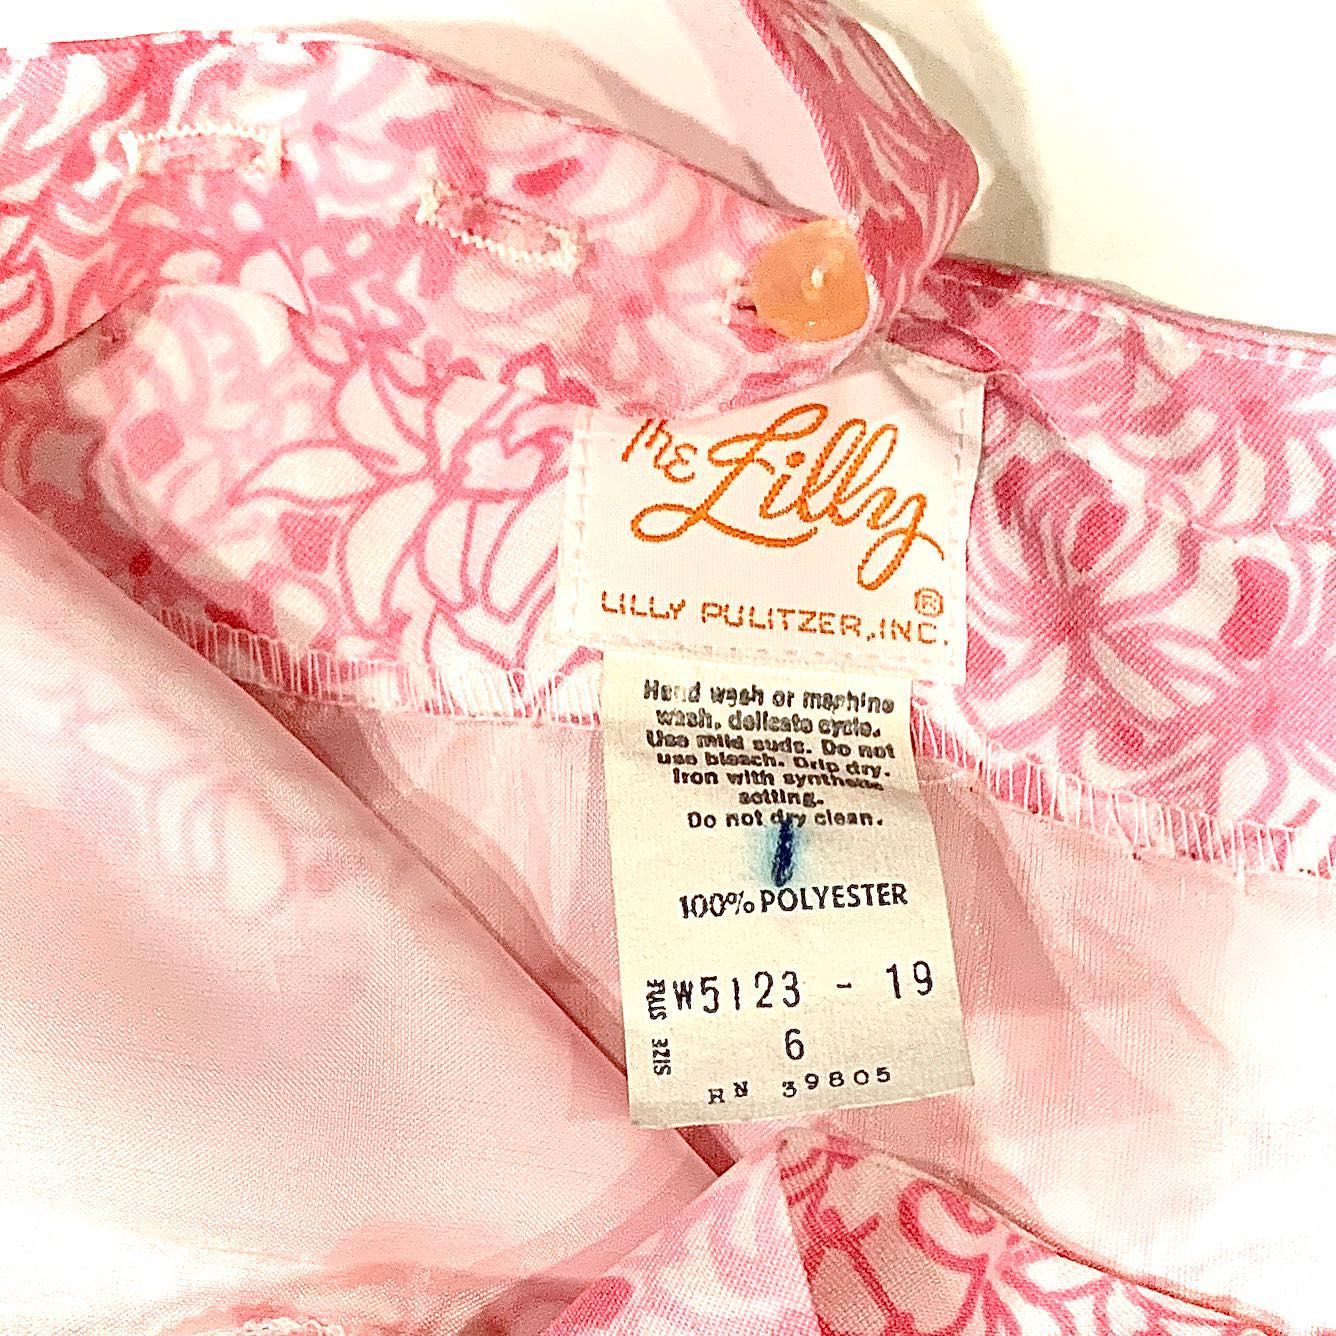 Vintage Lilly Pulitzer pink & white floral maxi dress